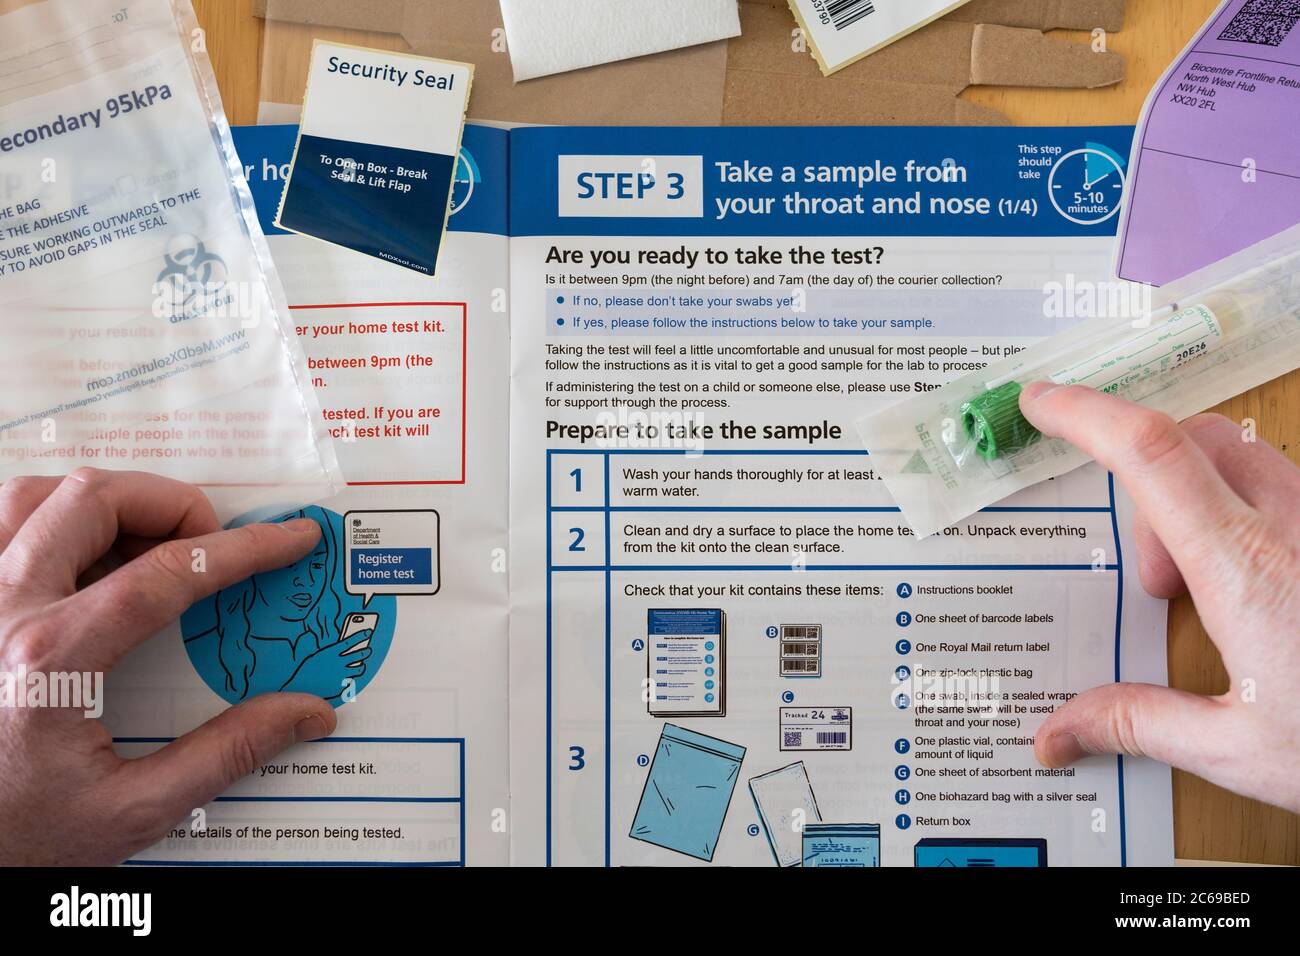 The contents of a UK Coronavirus (Covid-19) home testing kit spread out over a table with a man's hands resting on a sampling kit and instructions Stock Photo